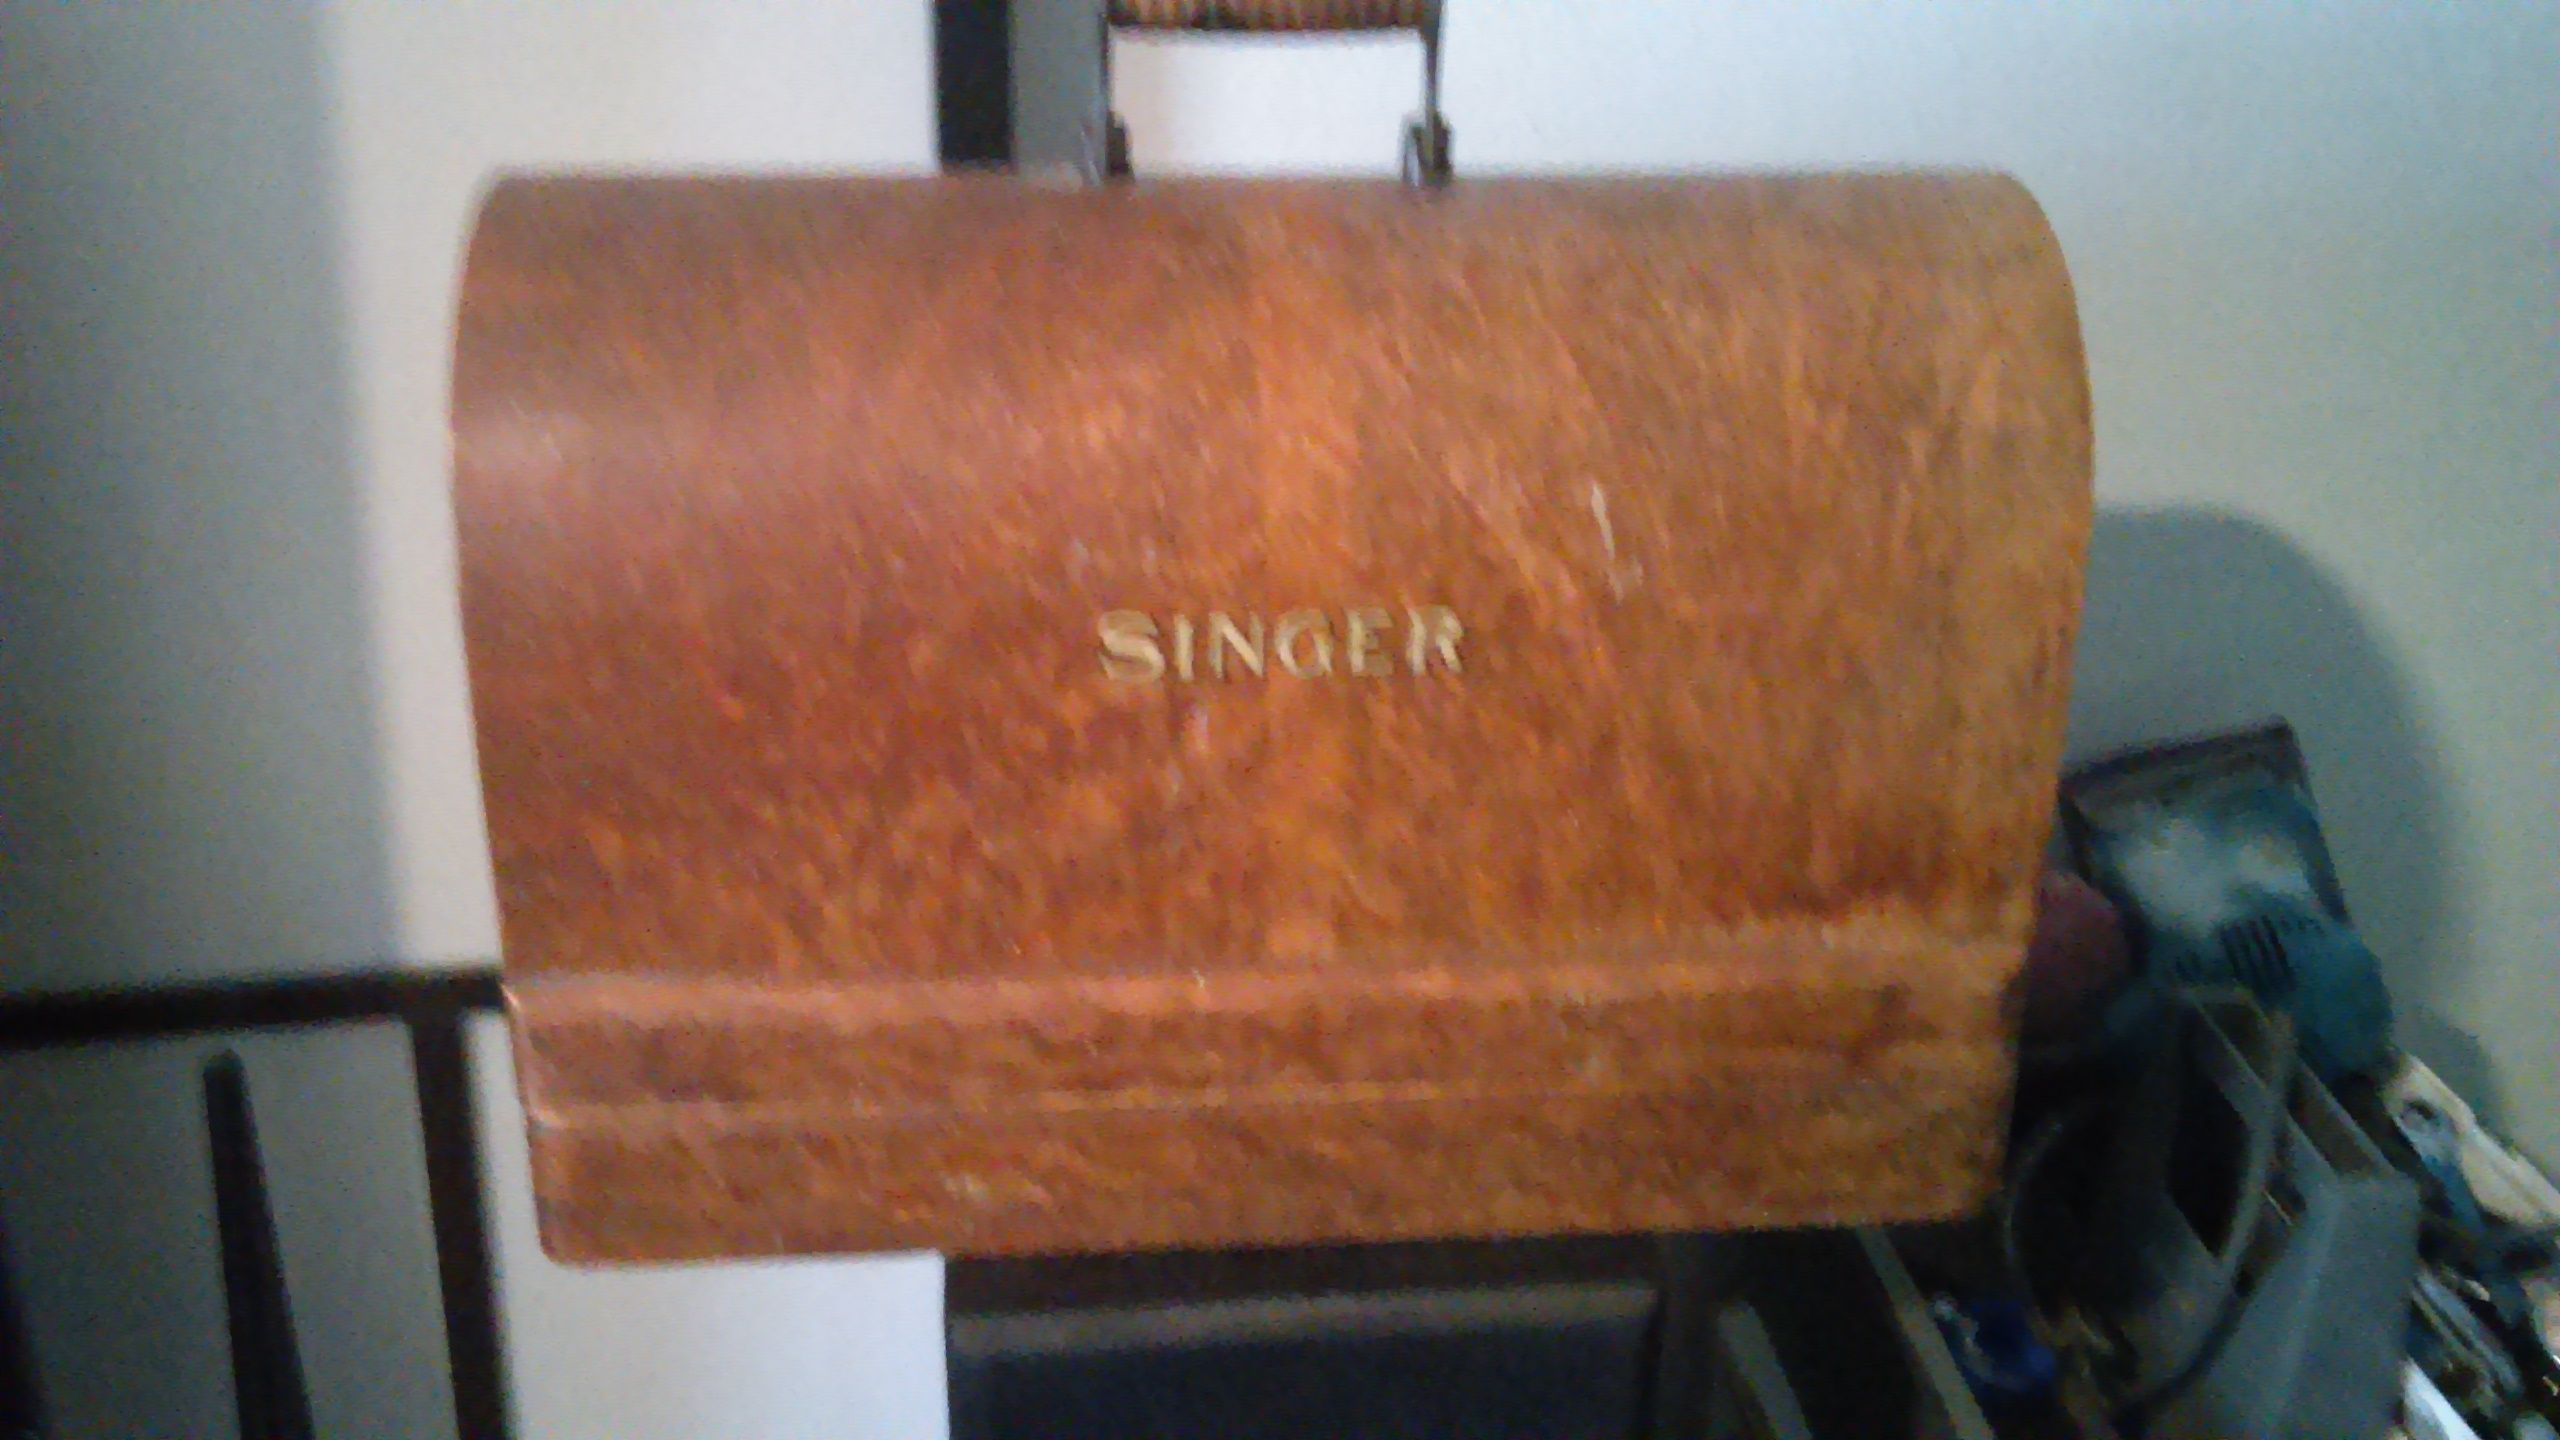 1901 singer sewing machine in excellent shape